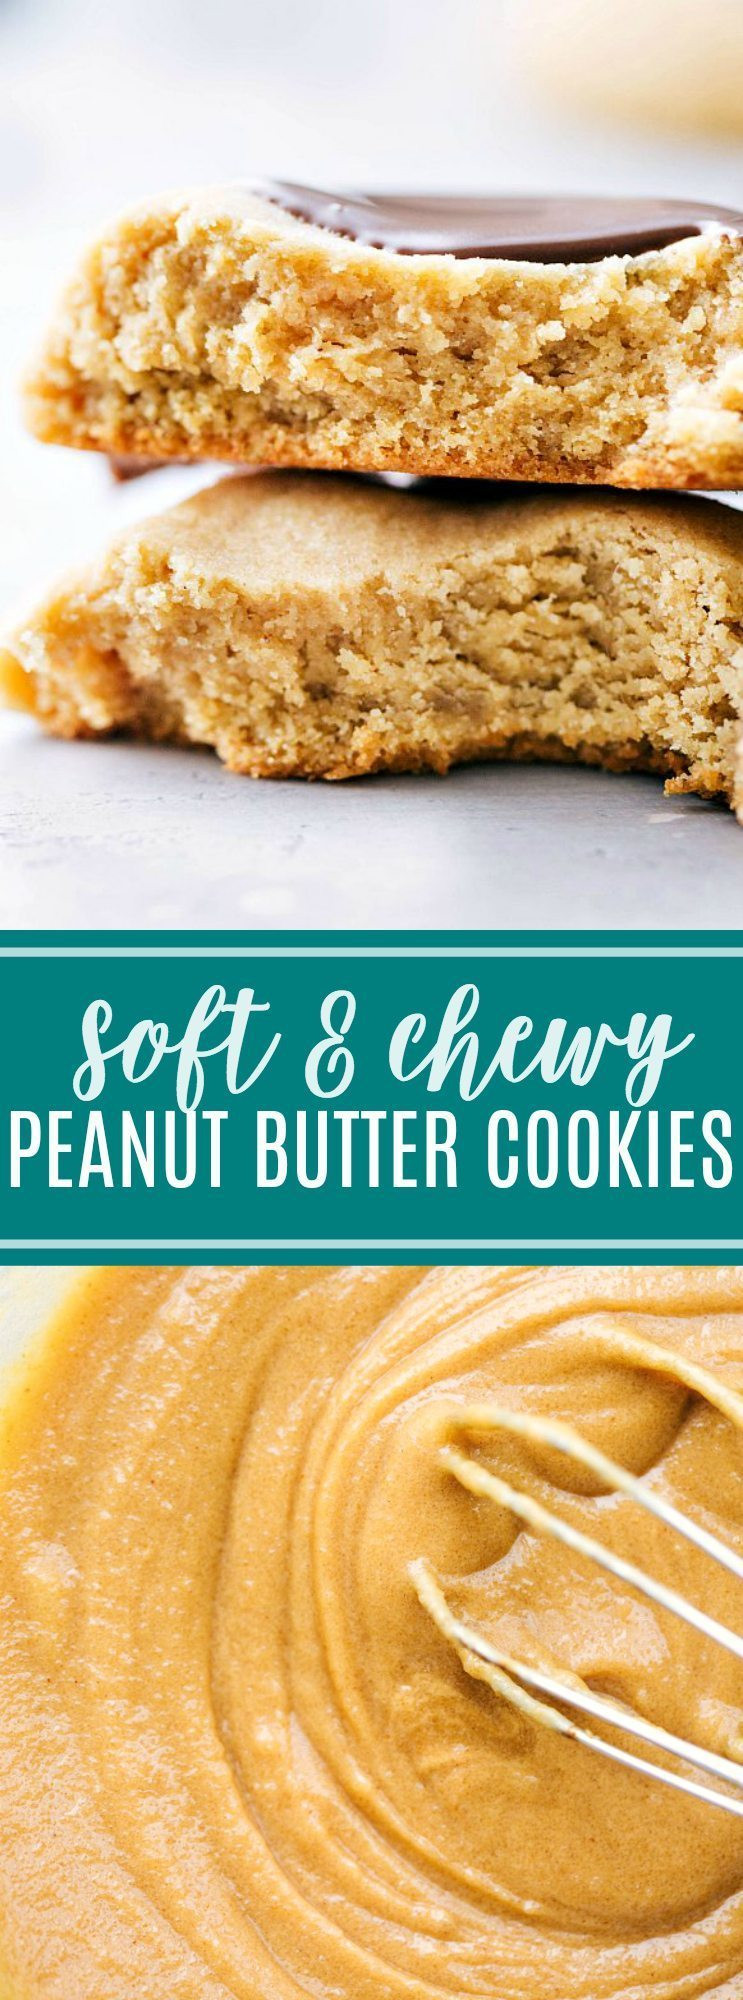 Best Chewy Peanut Butter Cookies
 The BEST Chewy Peanut Butter Cookies